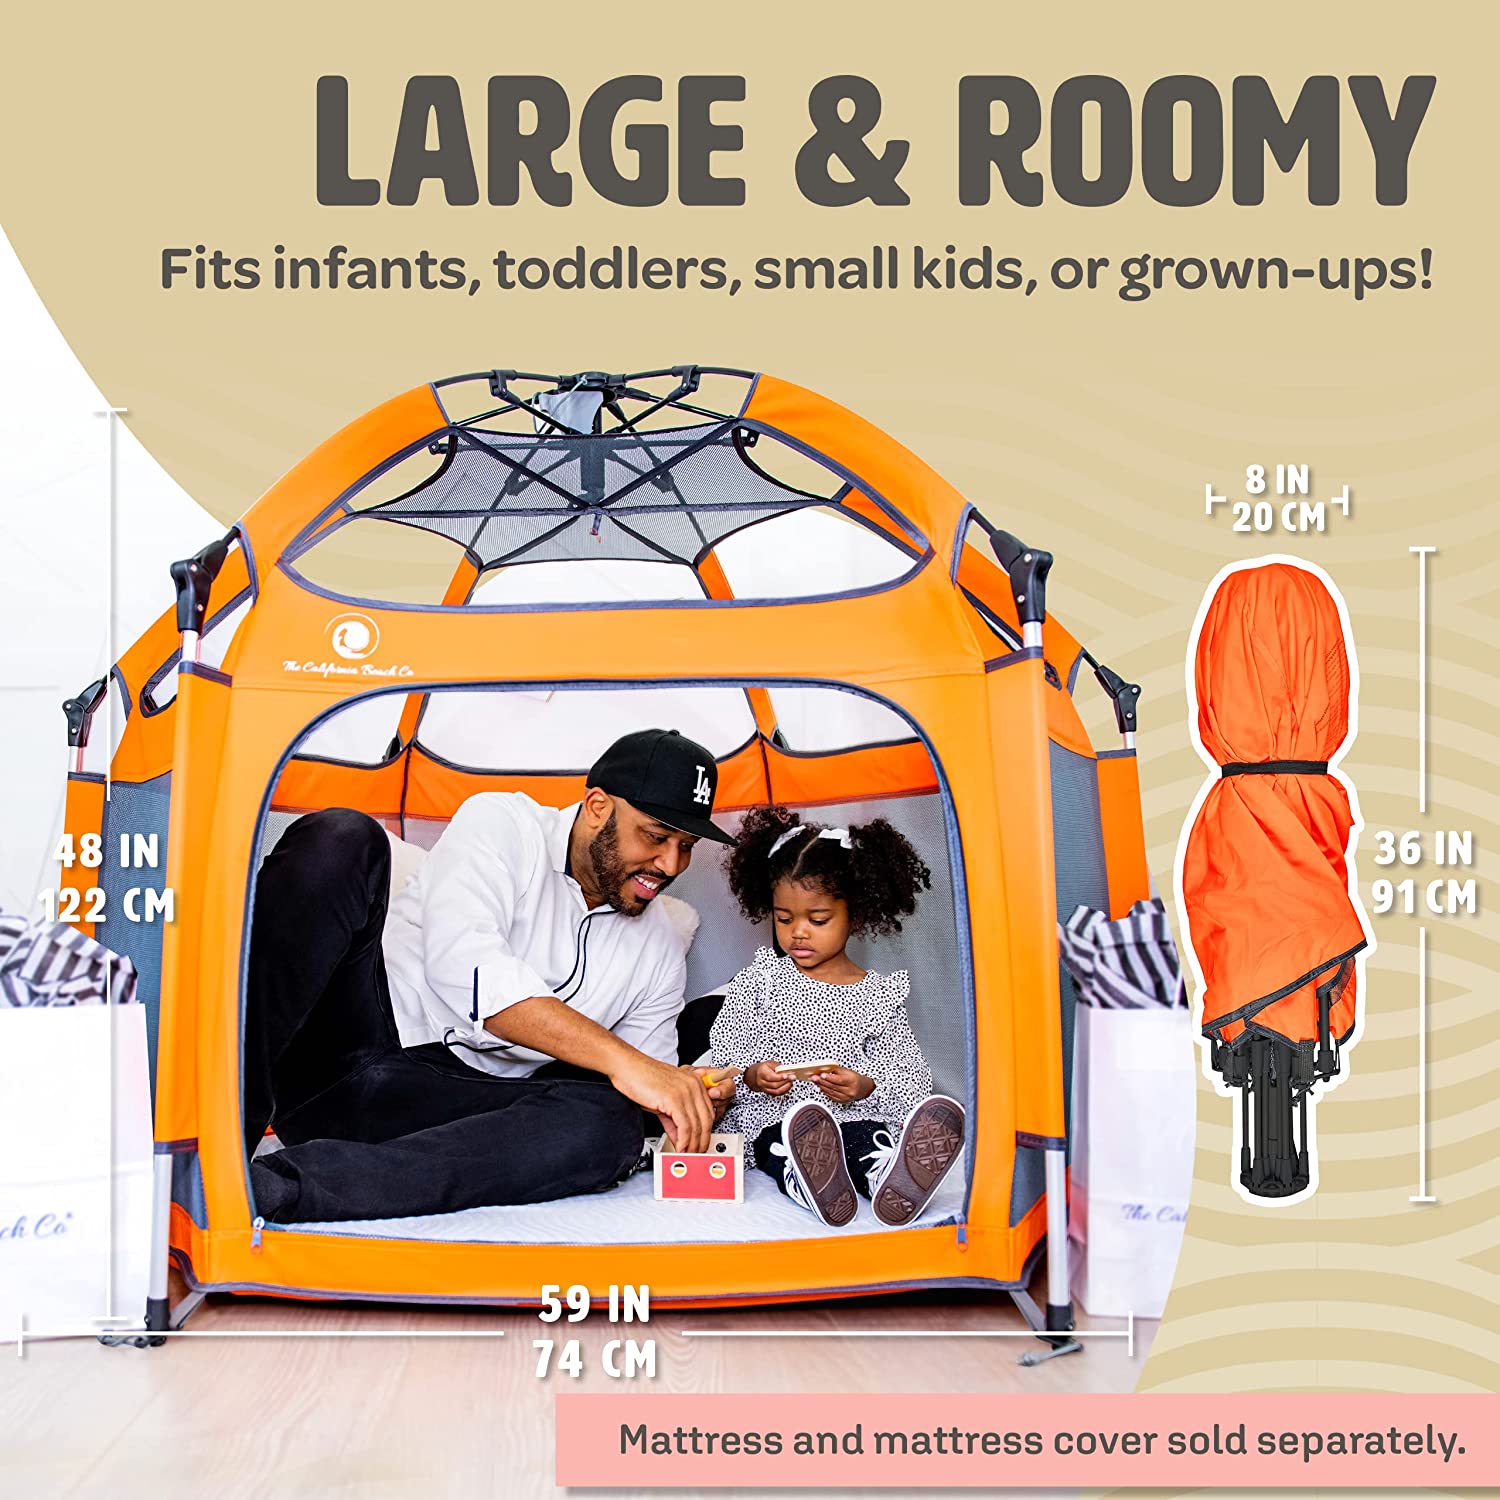 POP 'N GO Premium Outdoor and Indoor Baby Playpen - Portable, Lightweight, Pop Up Pack and Play Toddler Play Yard w/Canopy and Travel Bag - Orange - image 5 of 7